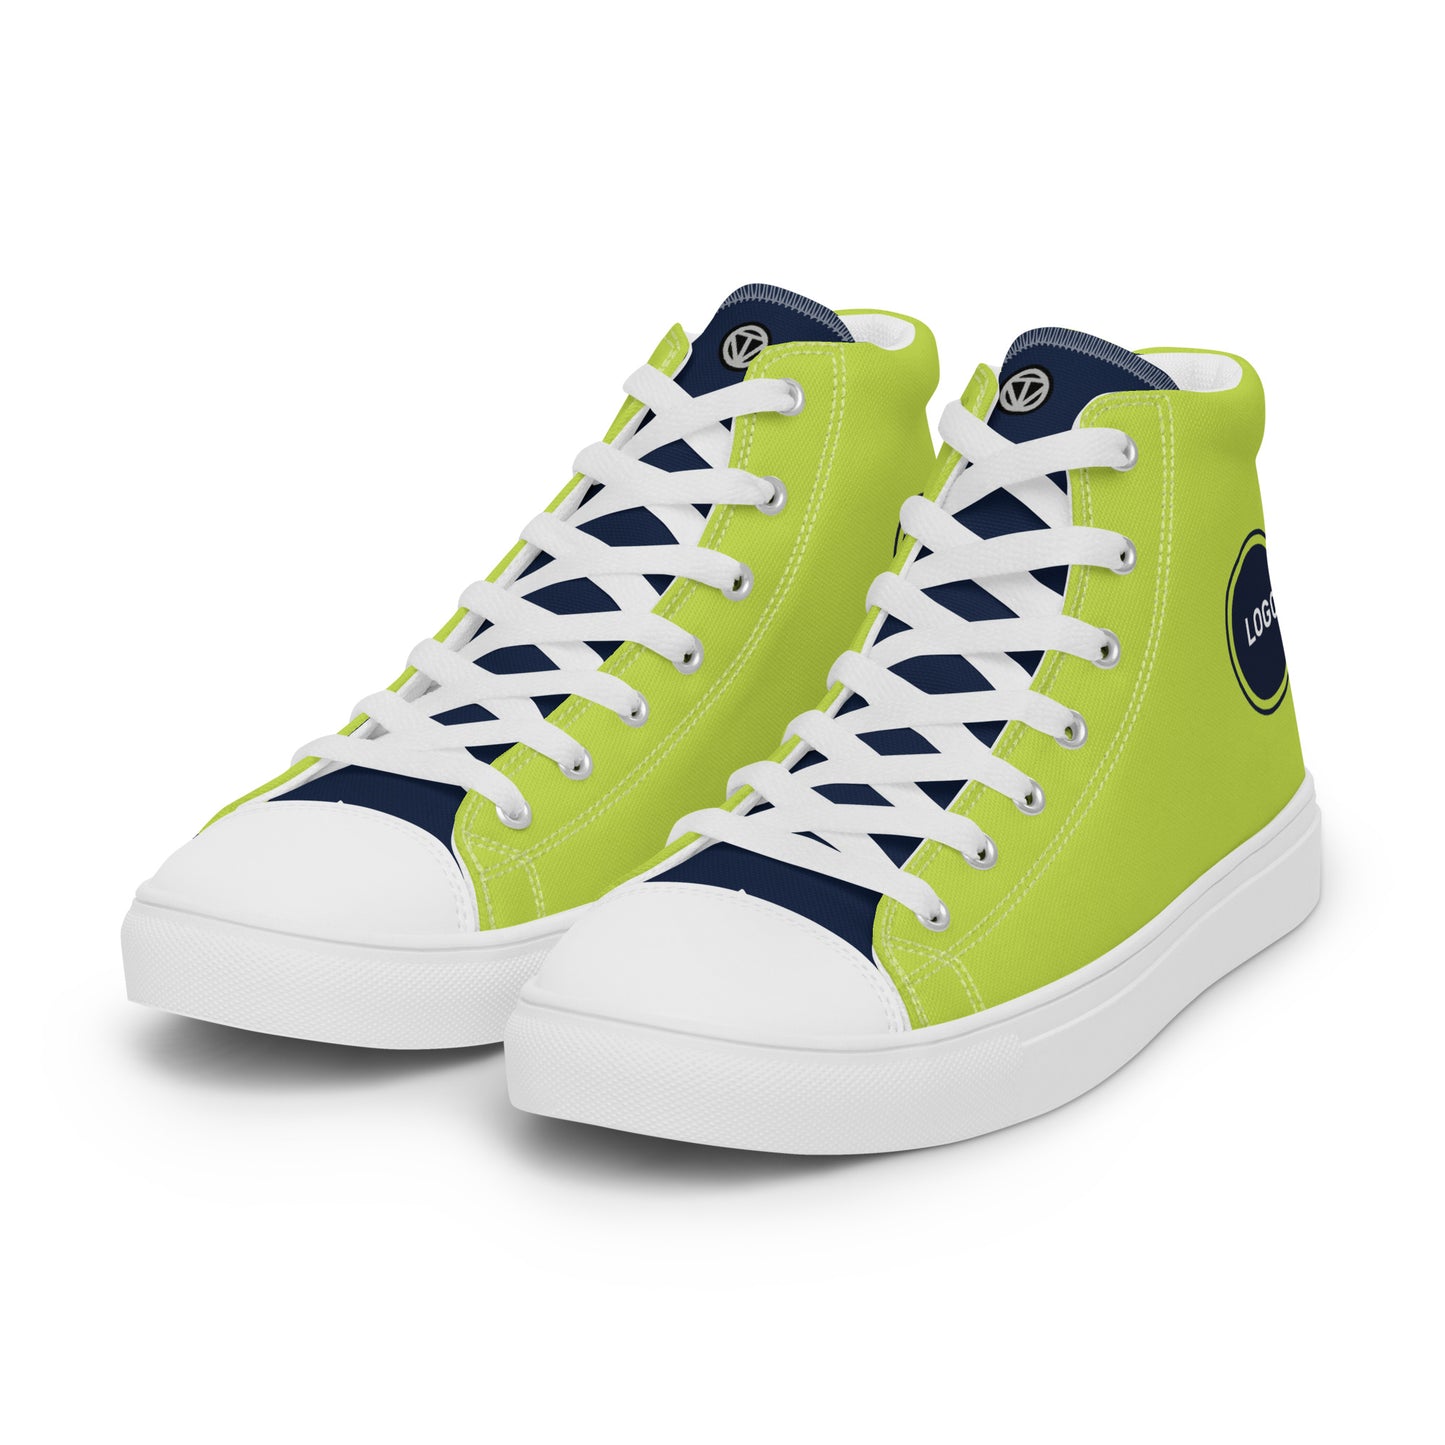 TIME OF VIBES - Women’s High Sneaker CORPORATE - €129.00